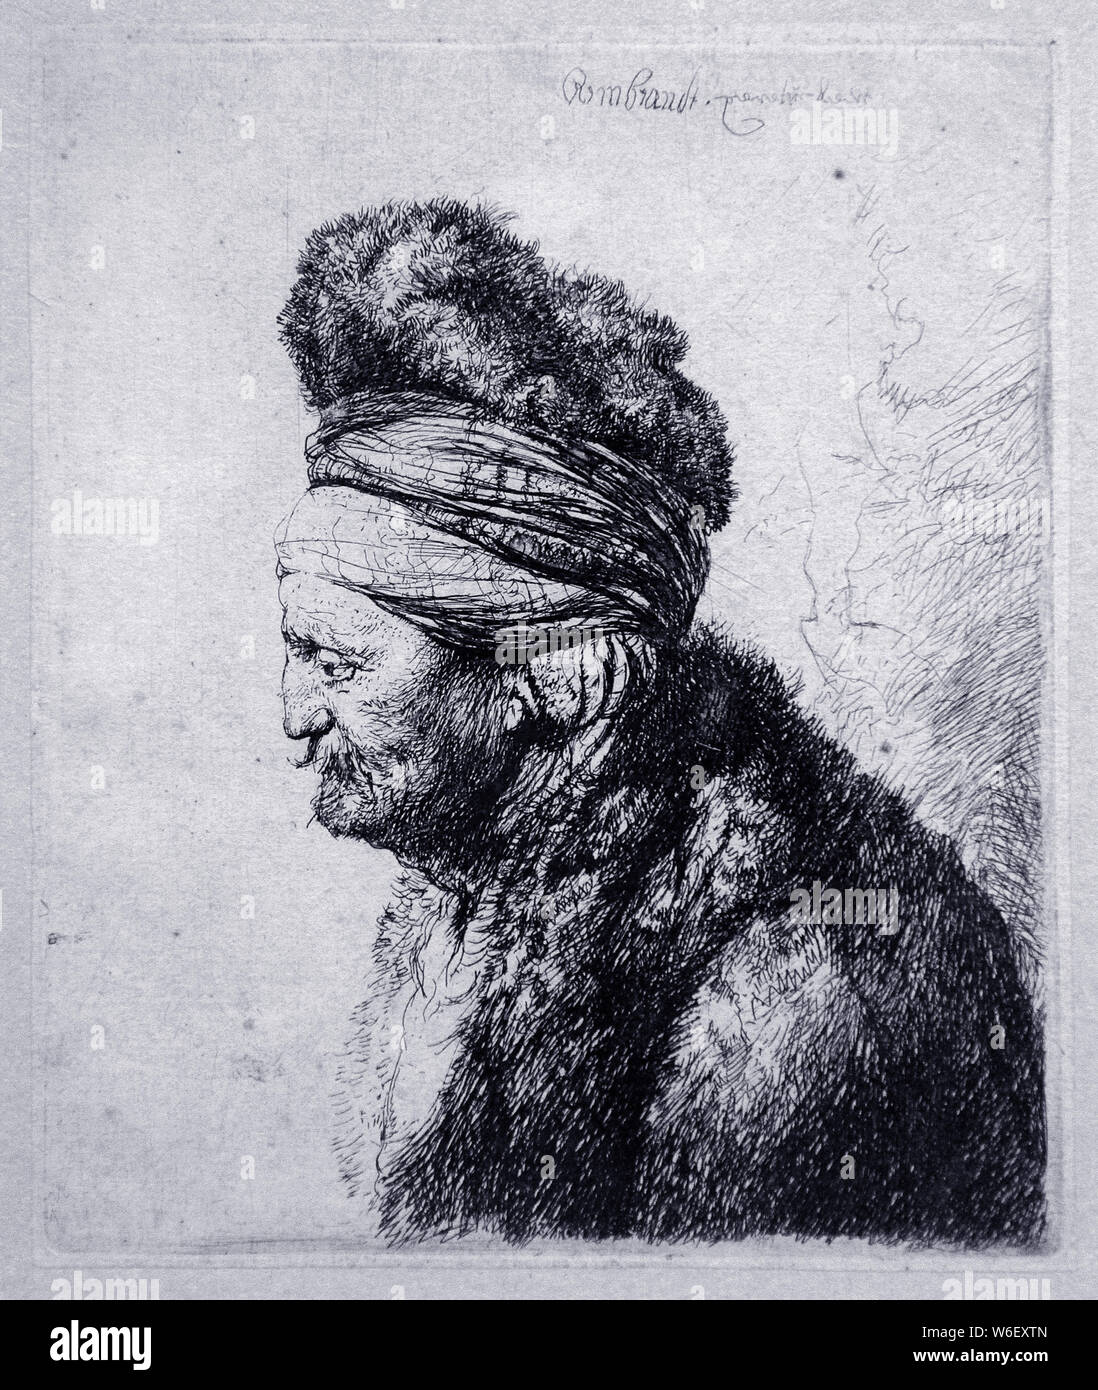 The second Oriental Head 1635 etching by Rembrandt Harmenszoon van Rijn 15 July 1606 – 4 October 1669 Dutch painter printmaker and draughtsman. Stock Photo